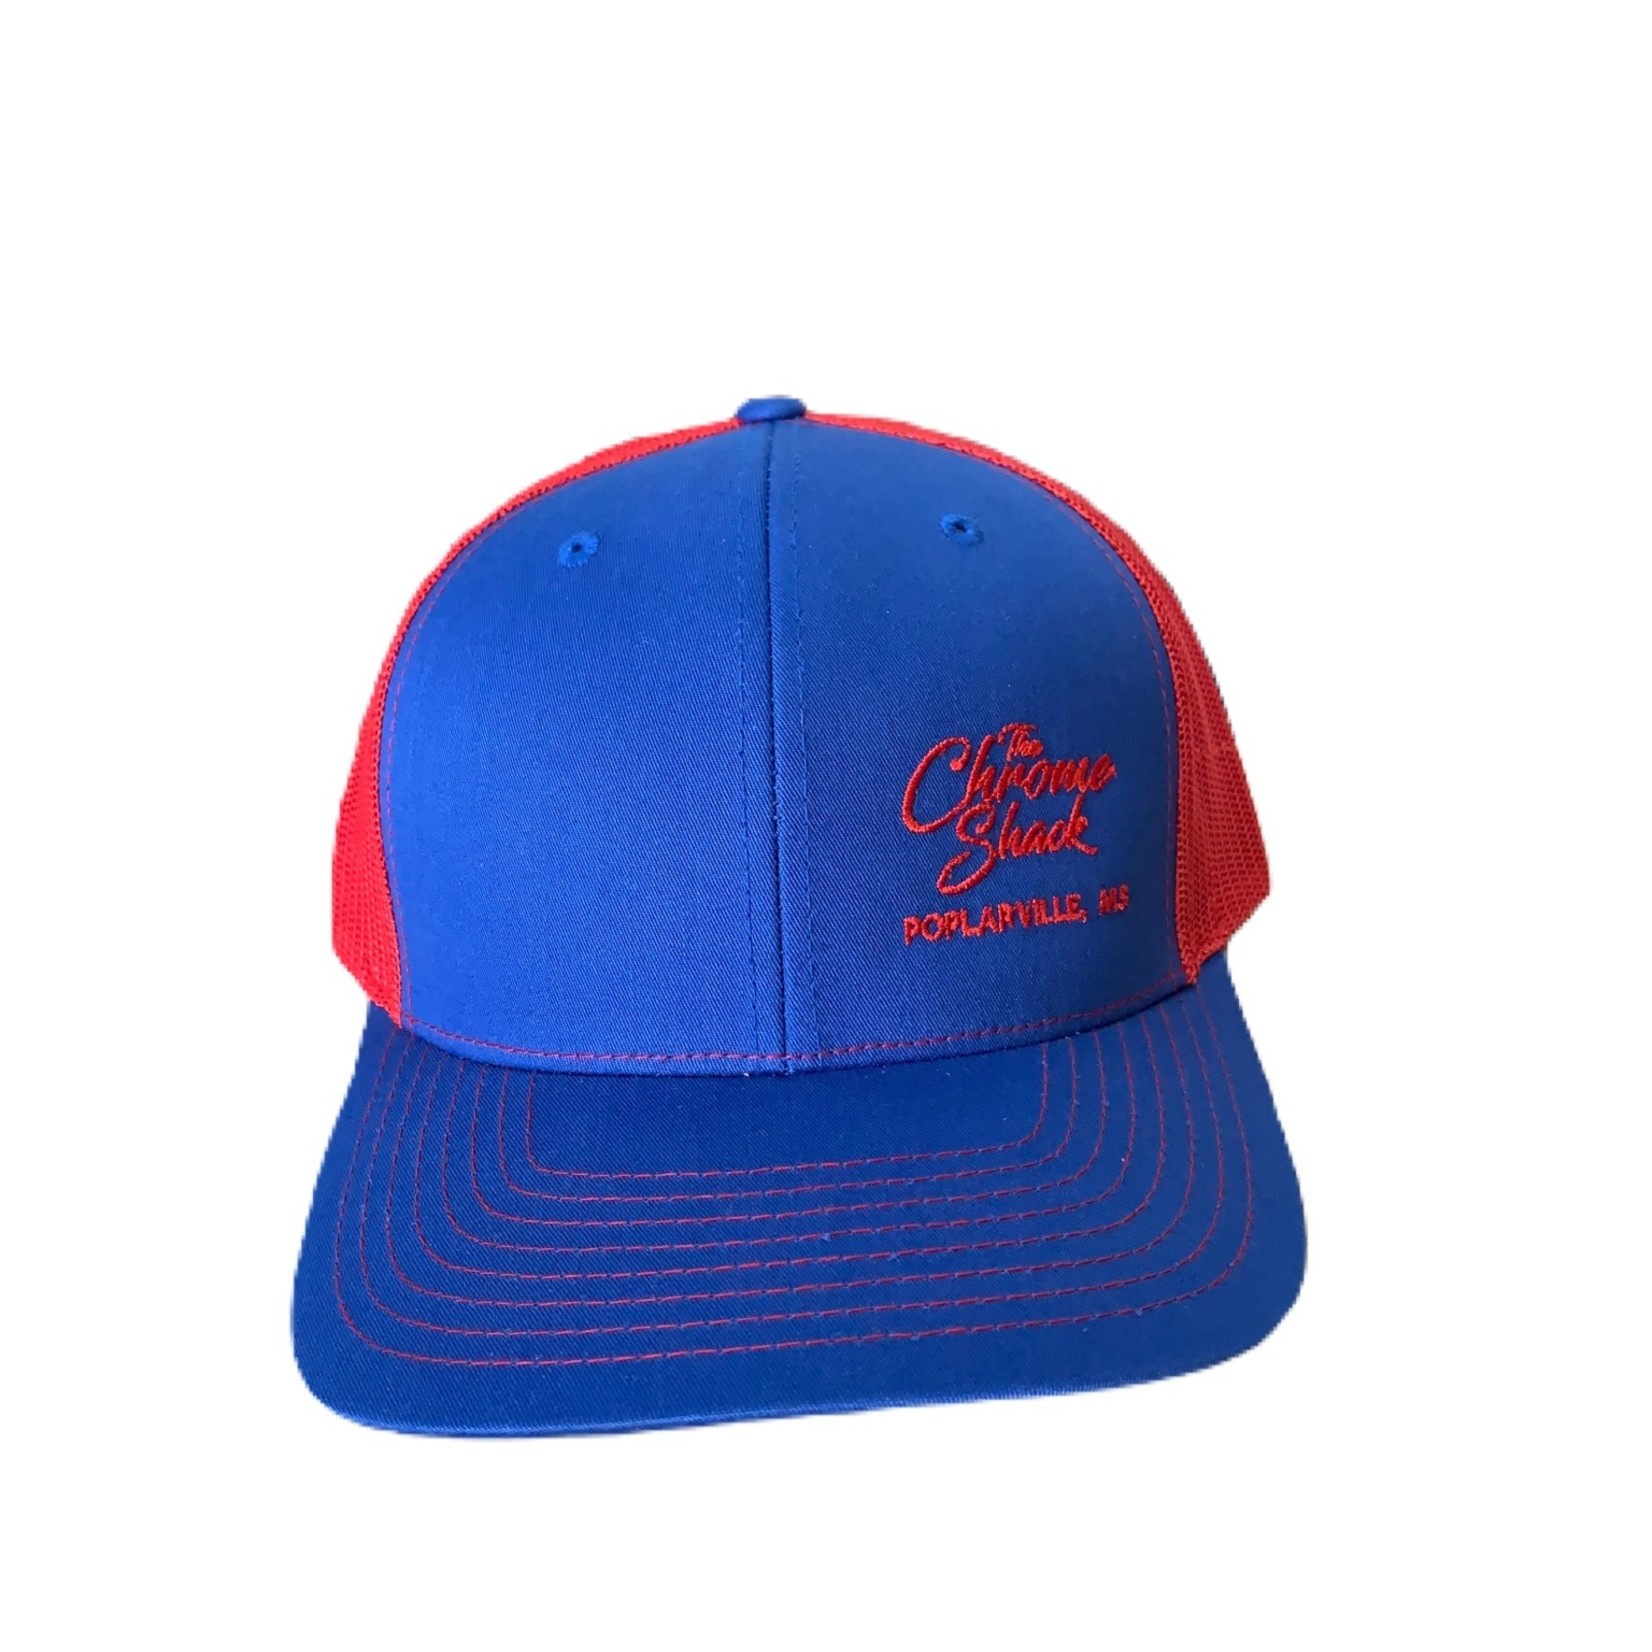 The Chrome Shack Hat - Primary Colors